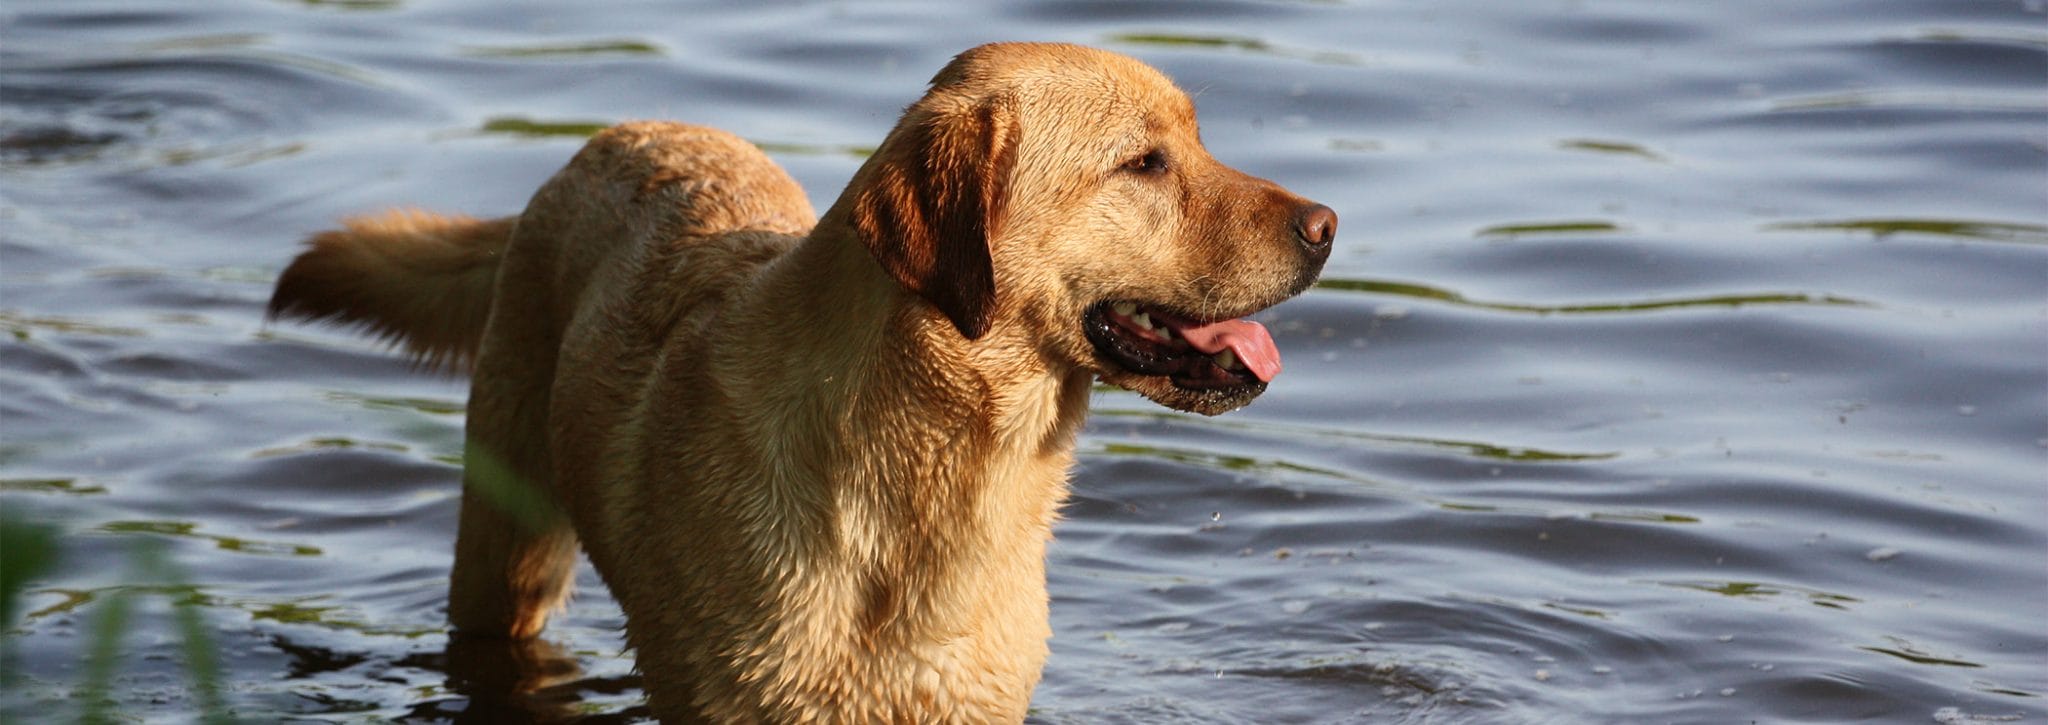 Yellow Labrador stands in water coming up to his knees.